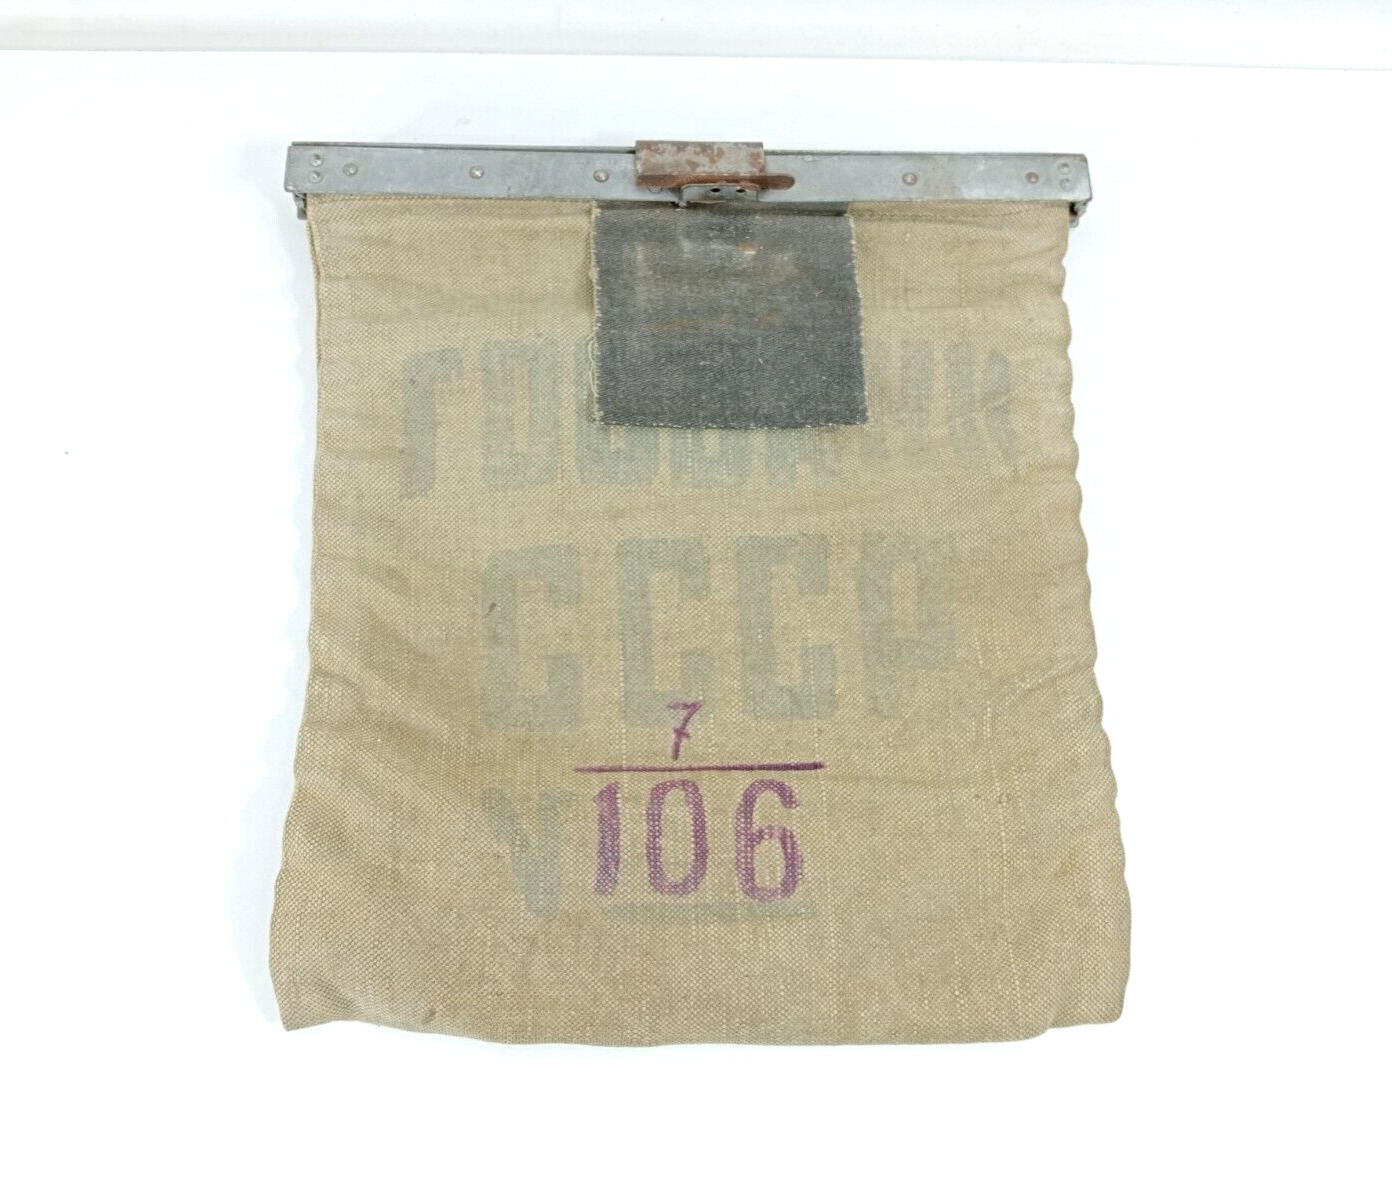 Vintage Collector's bag State Bank of the USSR Collectible Soviet Era Retro